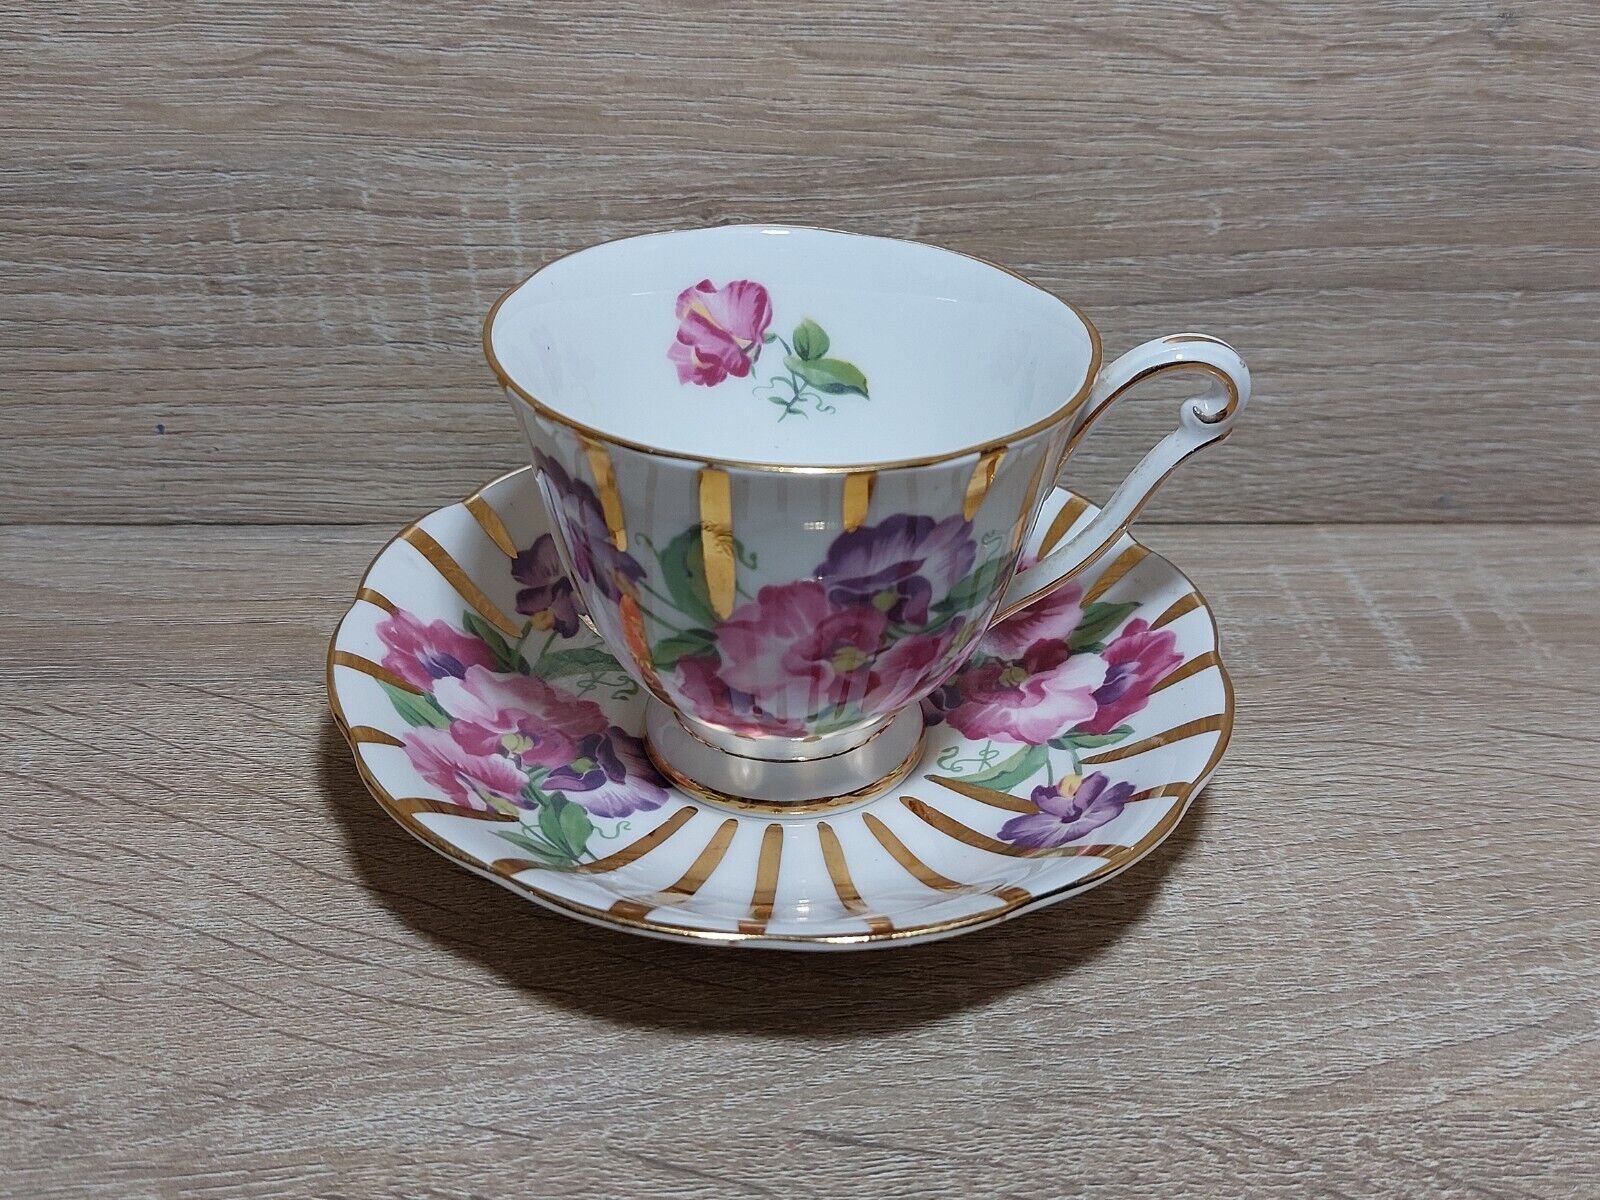 Vintage Queen Anne Bone China Teacup And Saucer Set - Violet Pink And Gold